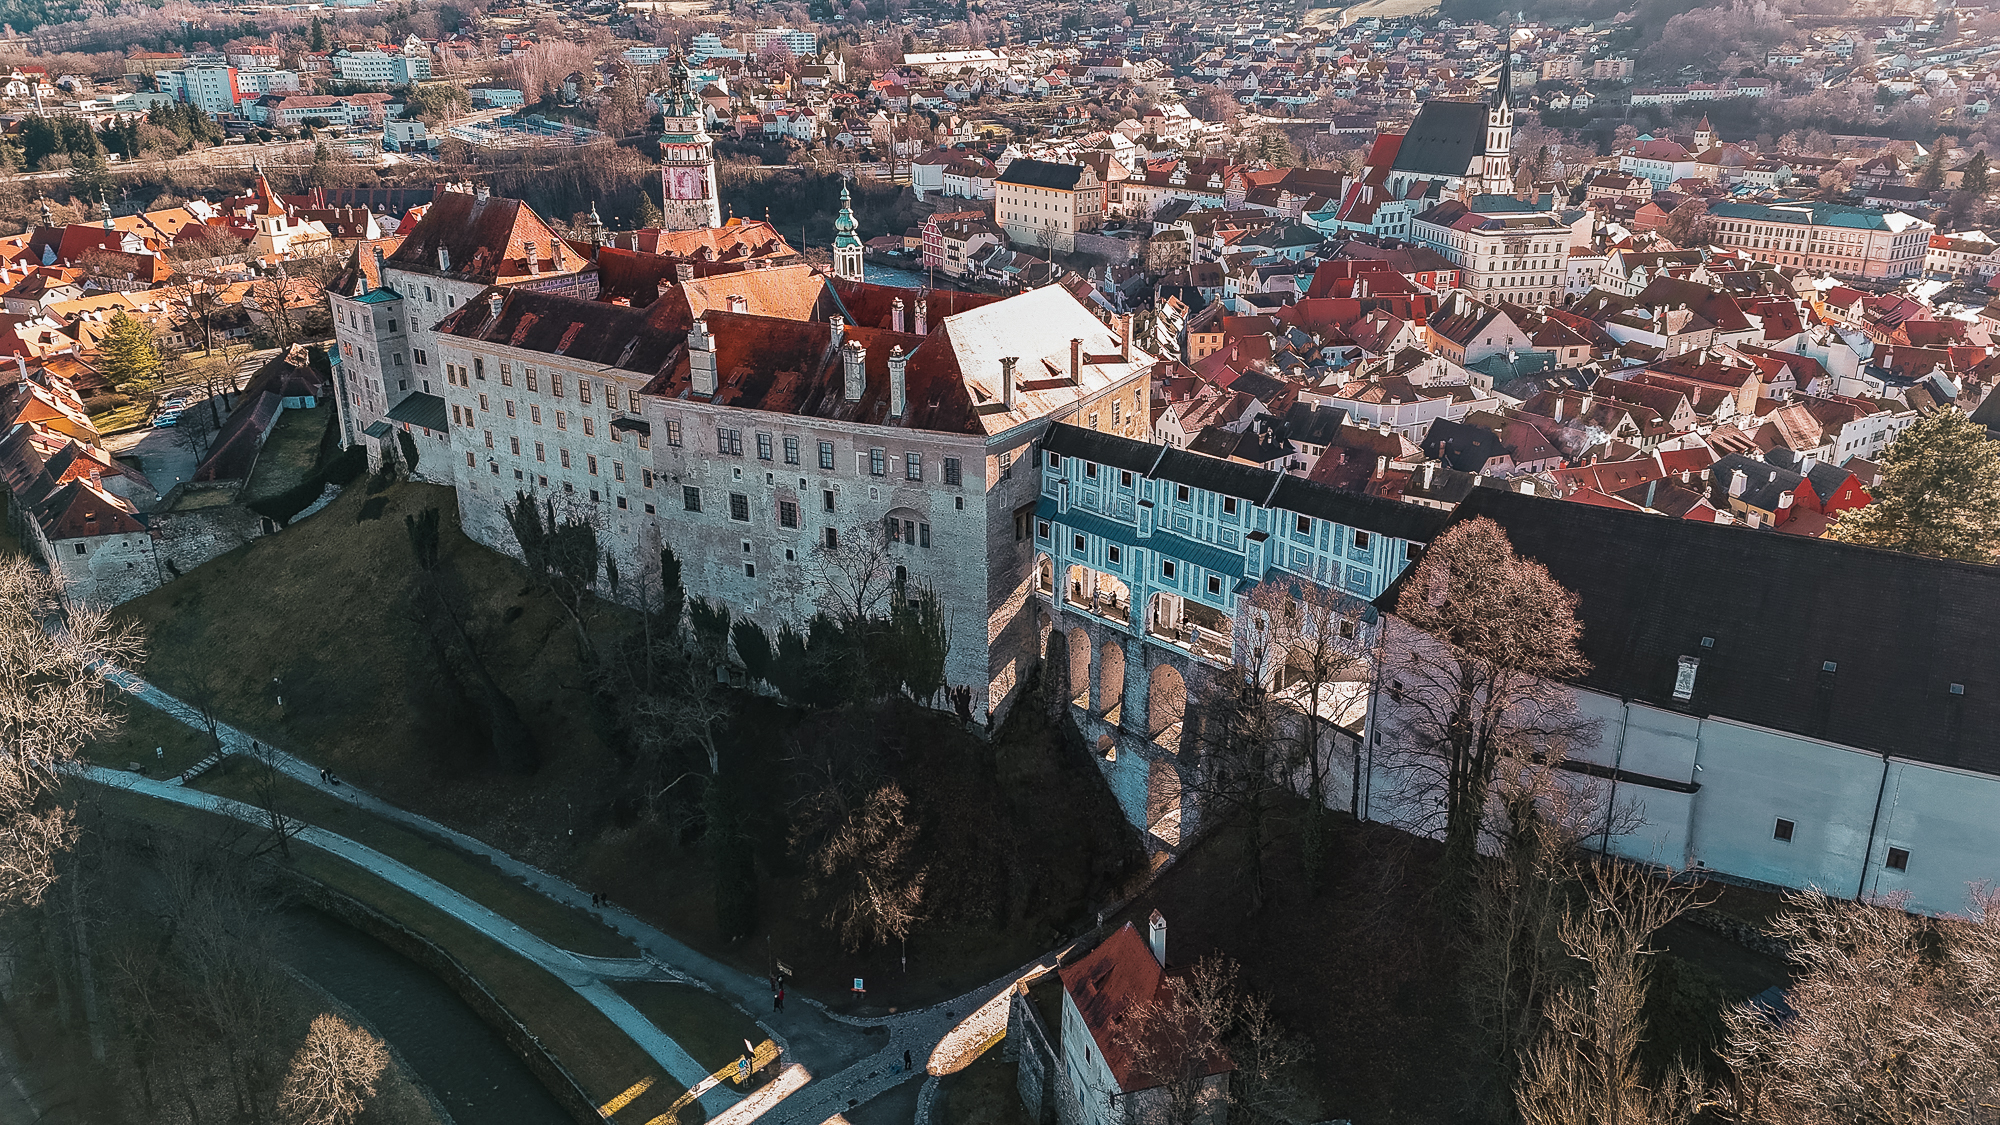 Cesky Krumlov: 20 Best Things to Do and See